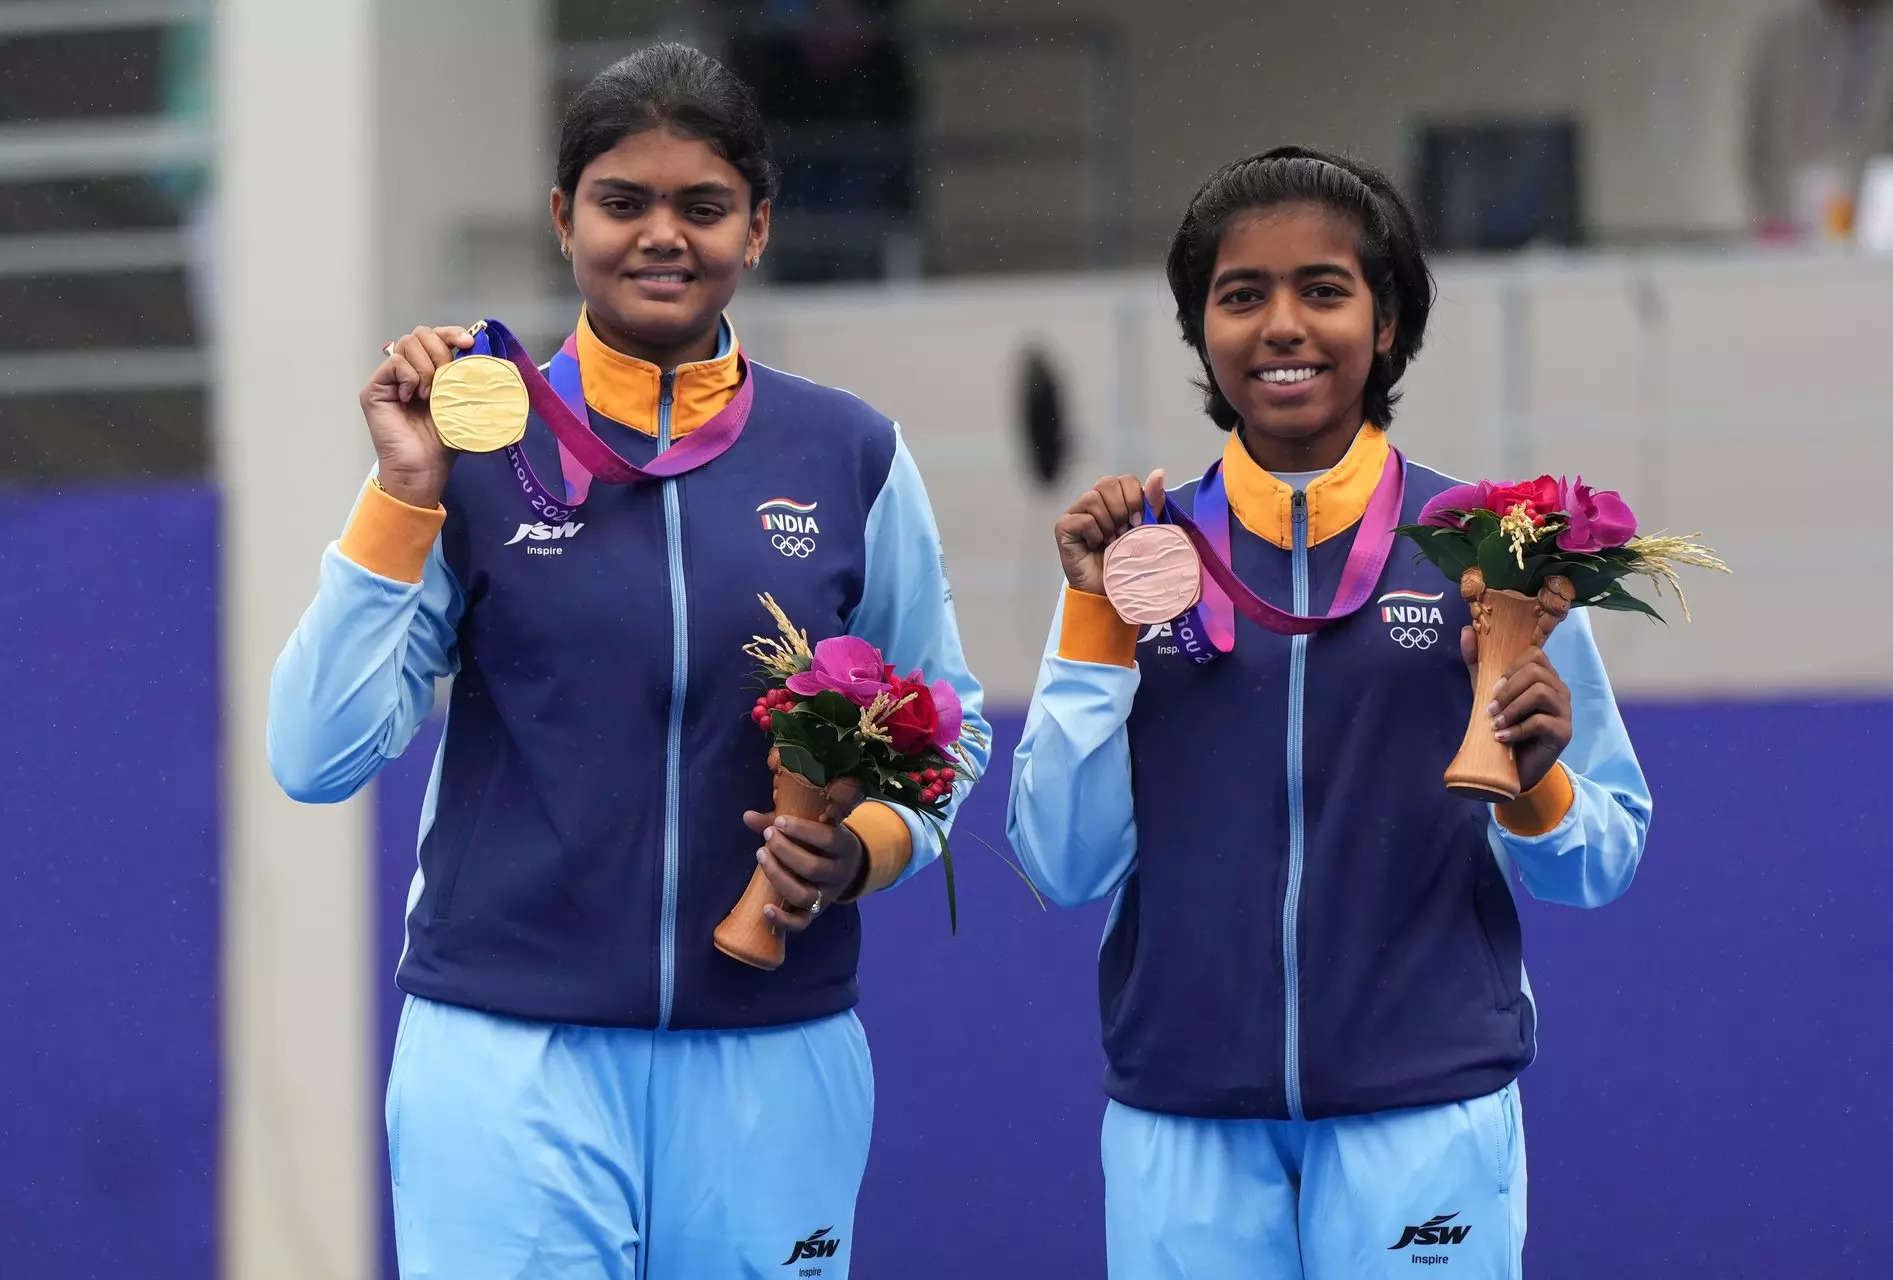 Asiad: Jyothi's gold medal adds shine to India's archery campaign